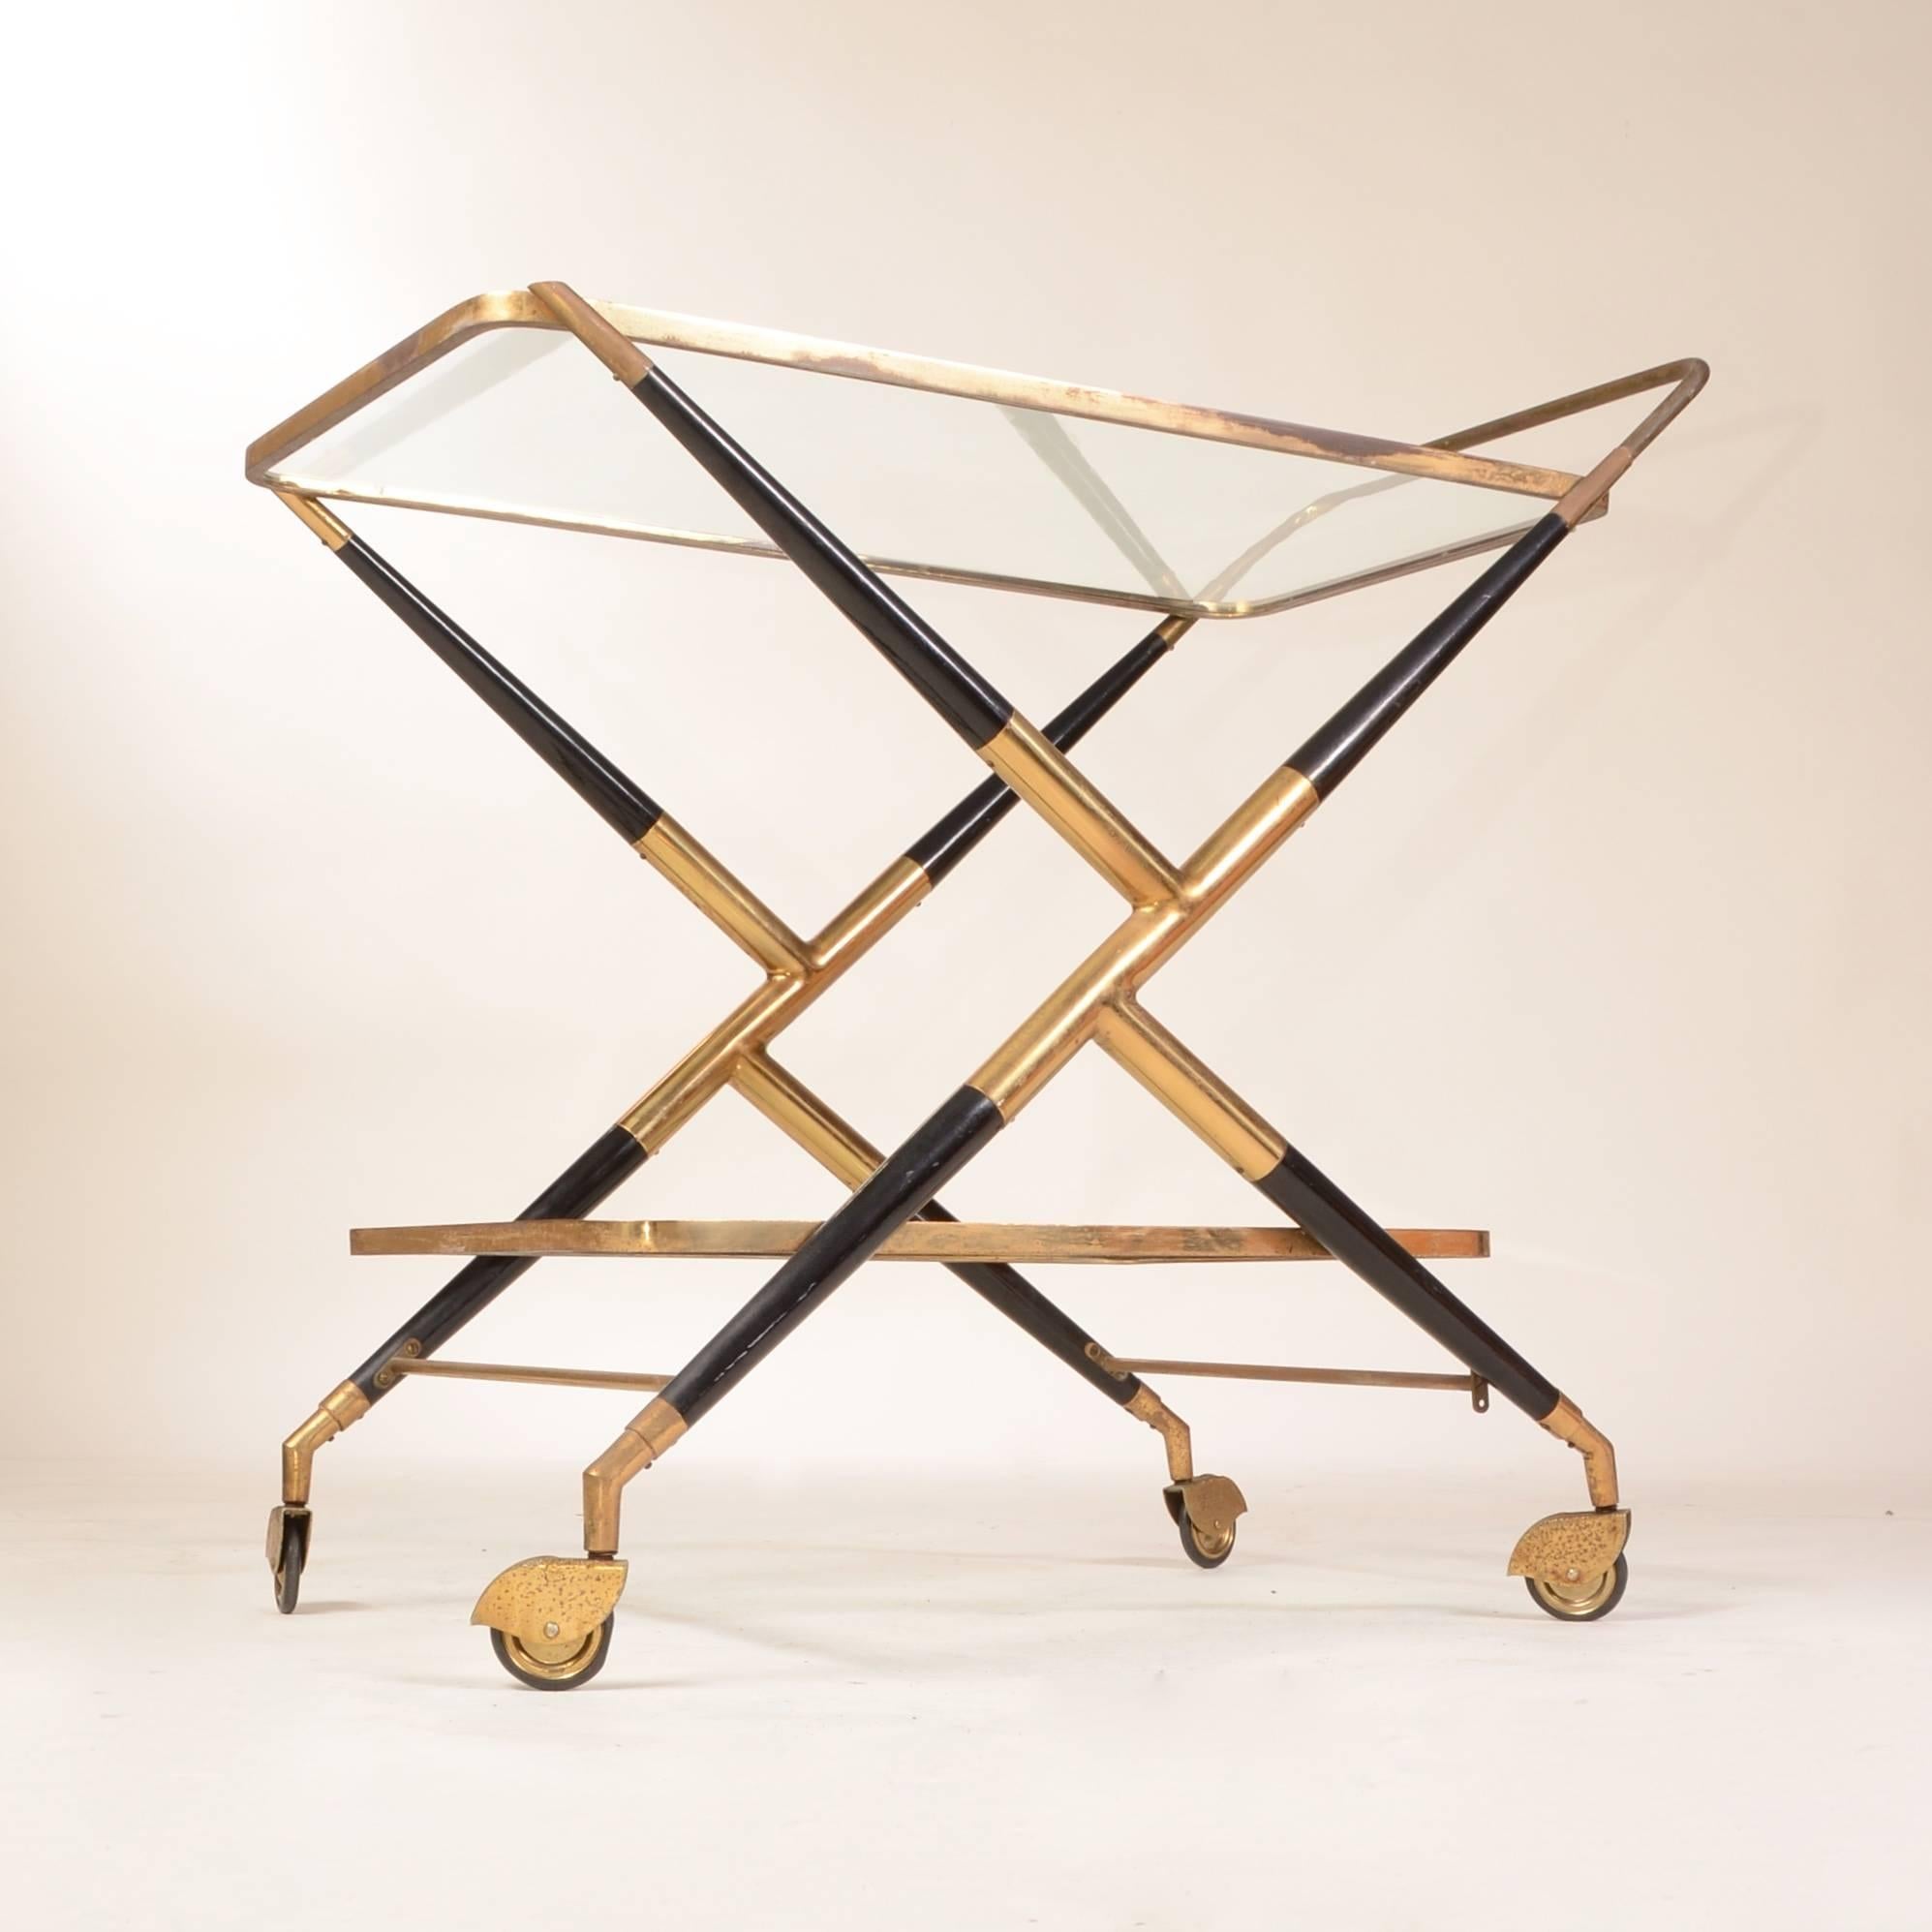 Italian designed brass, wood and glass bar cart by Cesare Lacca. Mid-century modern with a gorgeous patina. 